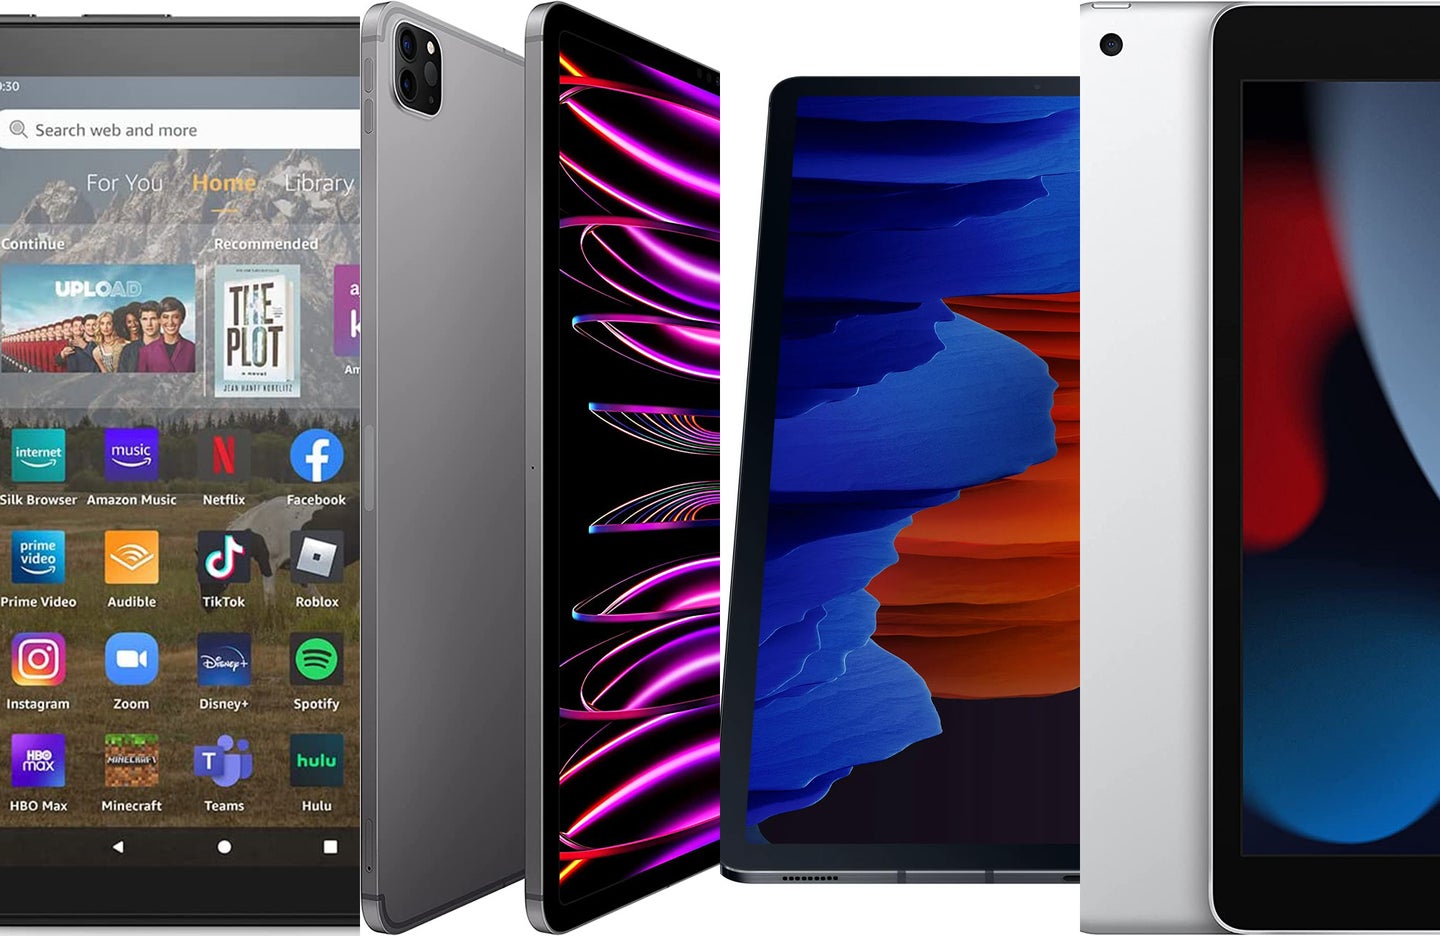 A lineup of tablets on sale at Walmart and Amazon this Cyber Monday